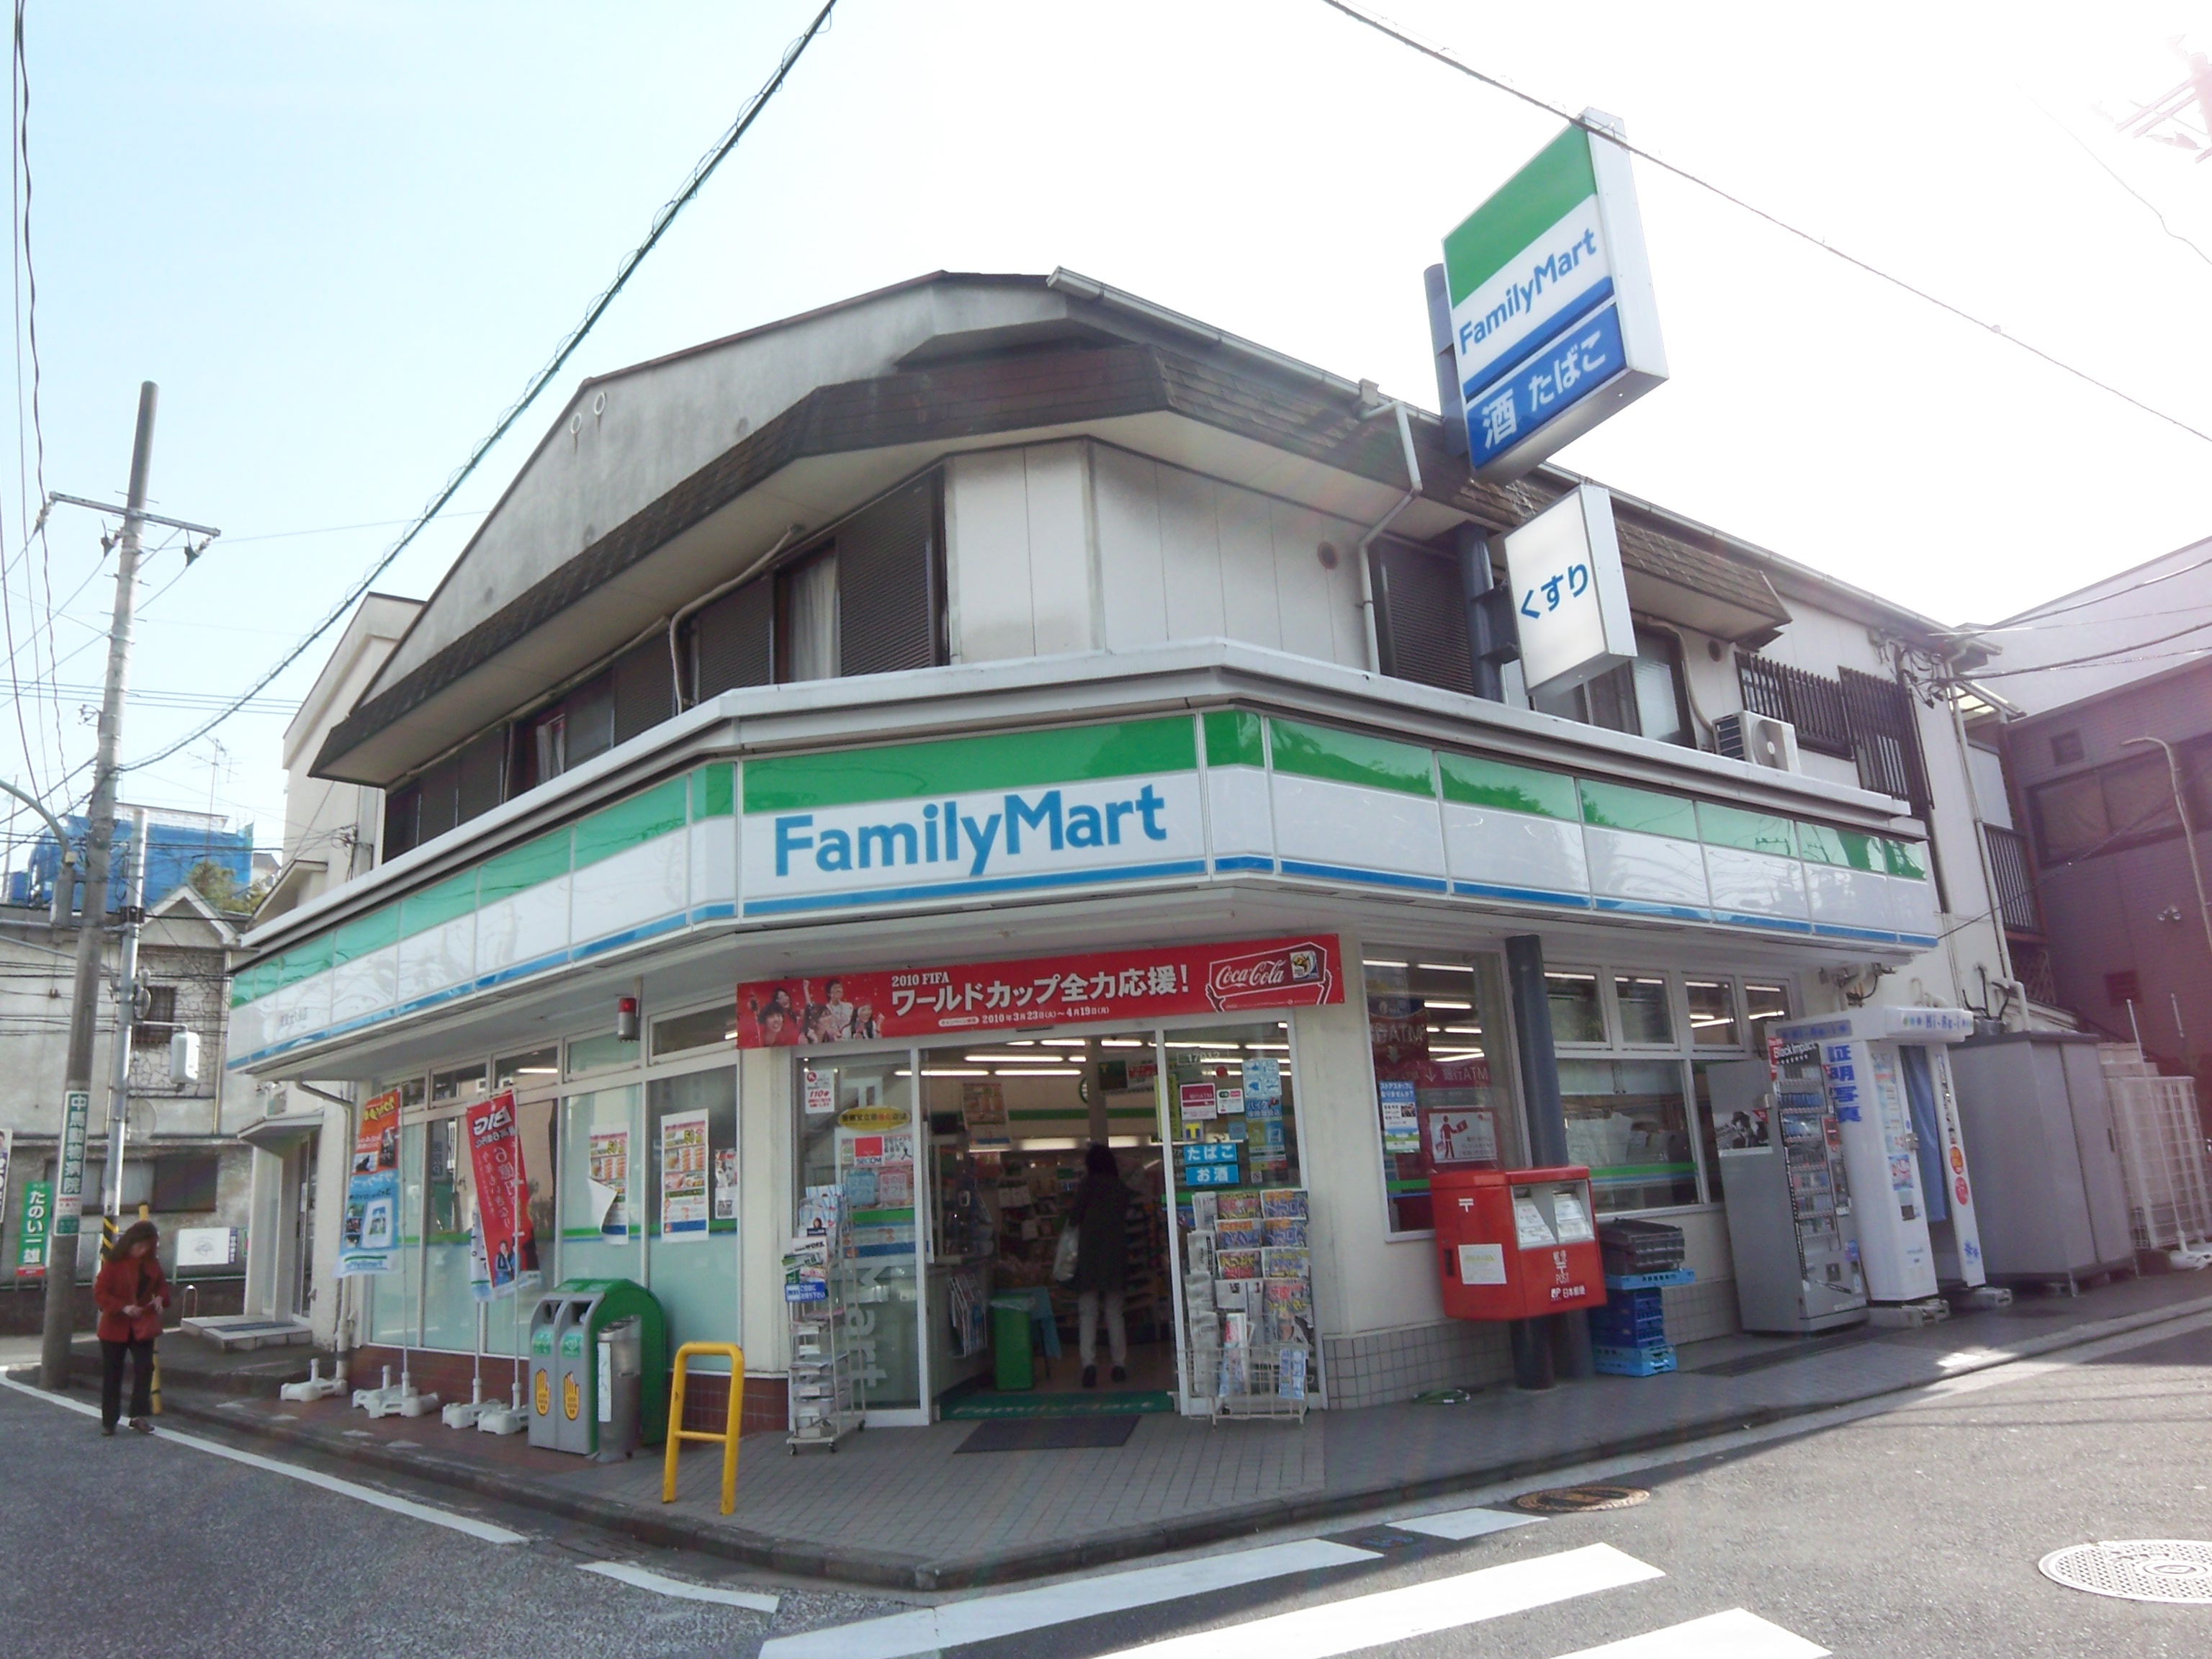 Convenience store. 88m to Family Mart (convenience store)